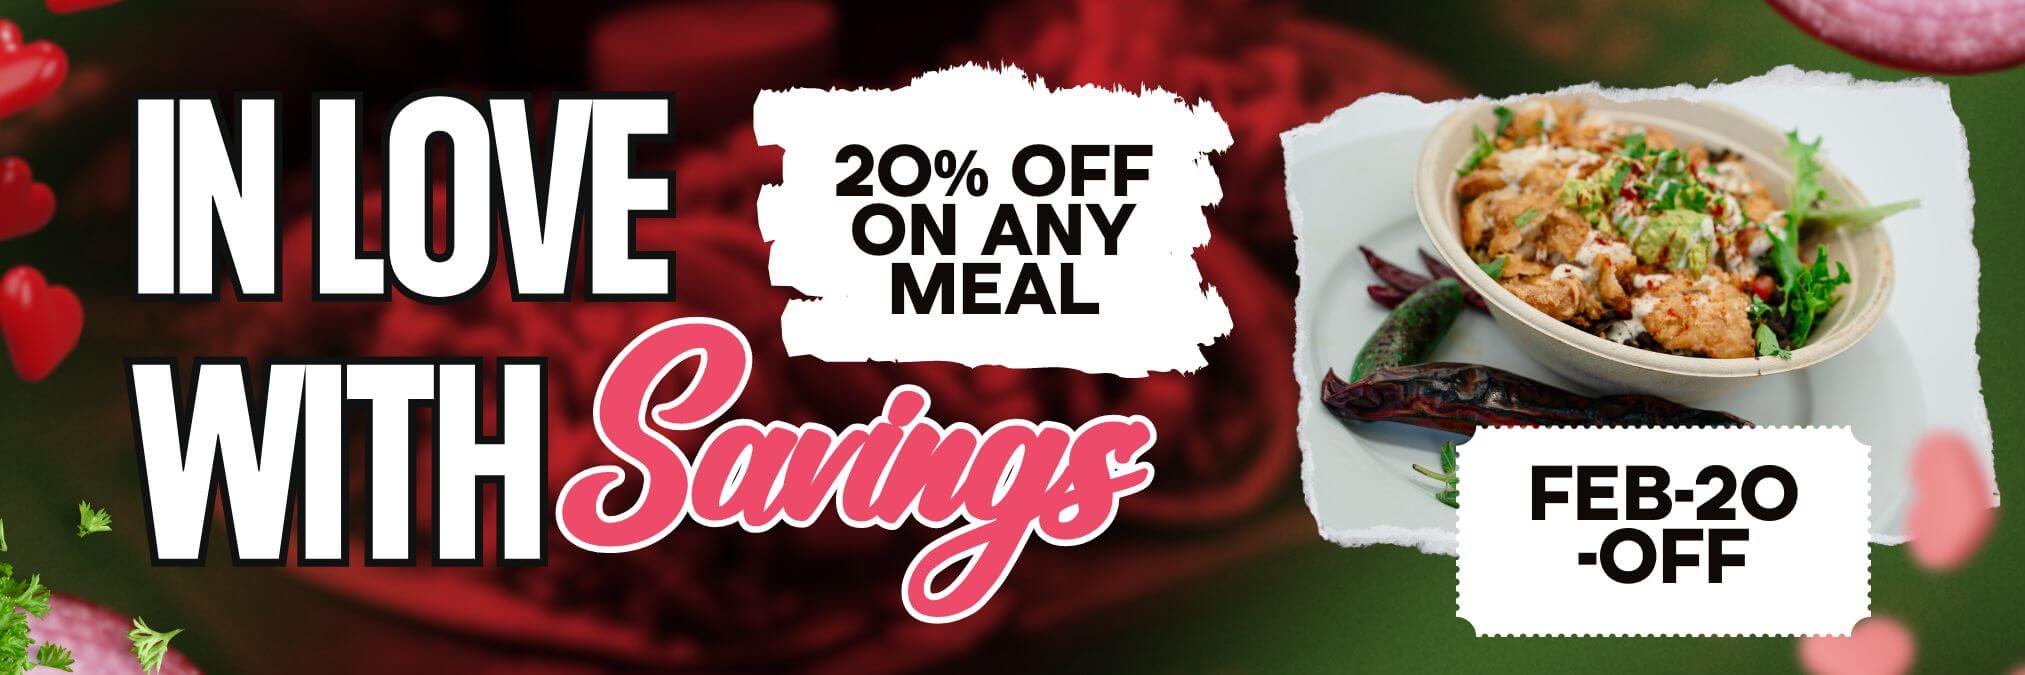 In Love with Savings - FEB 20% OFF - Cilantro Mexican